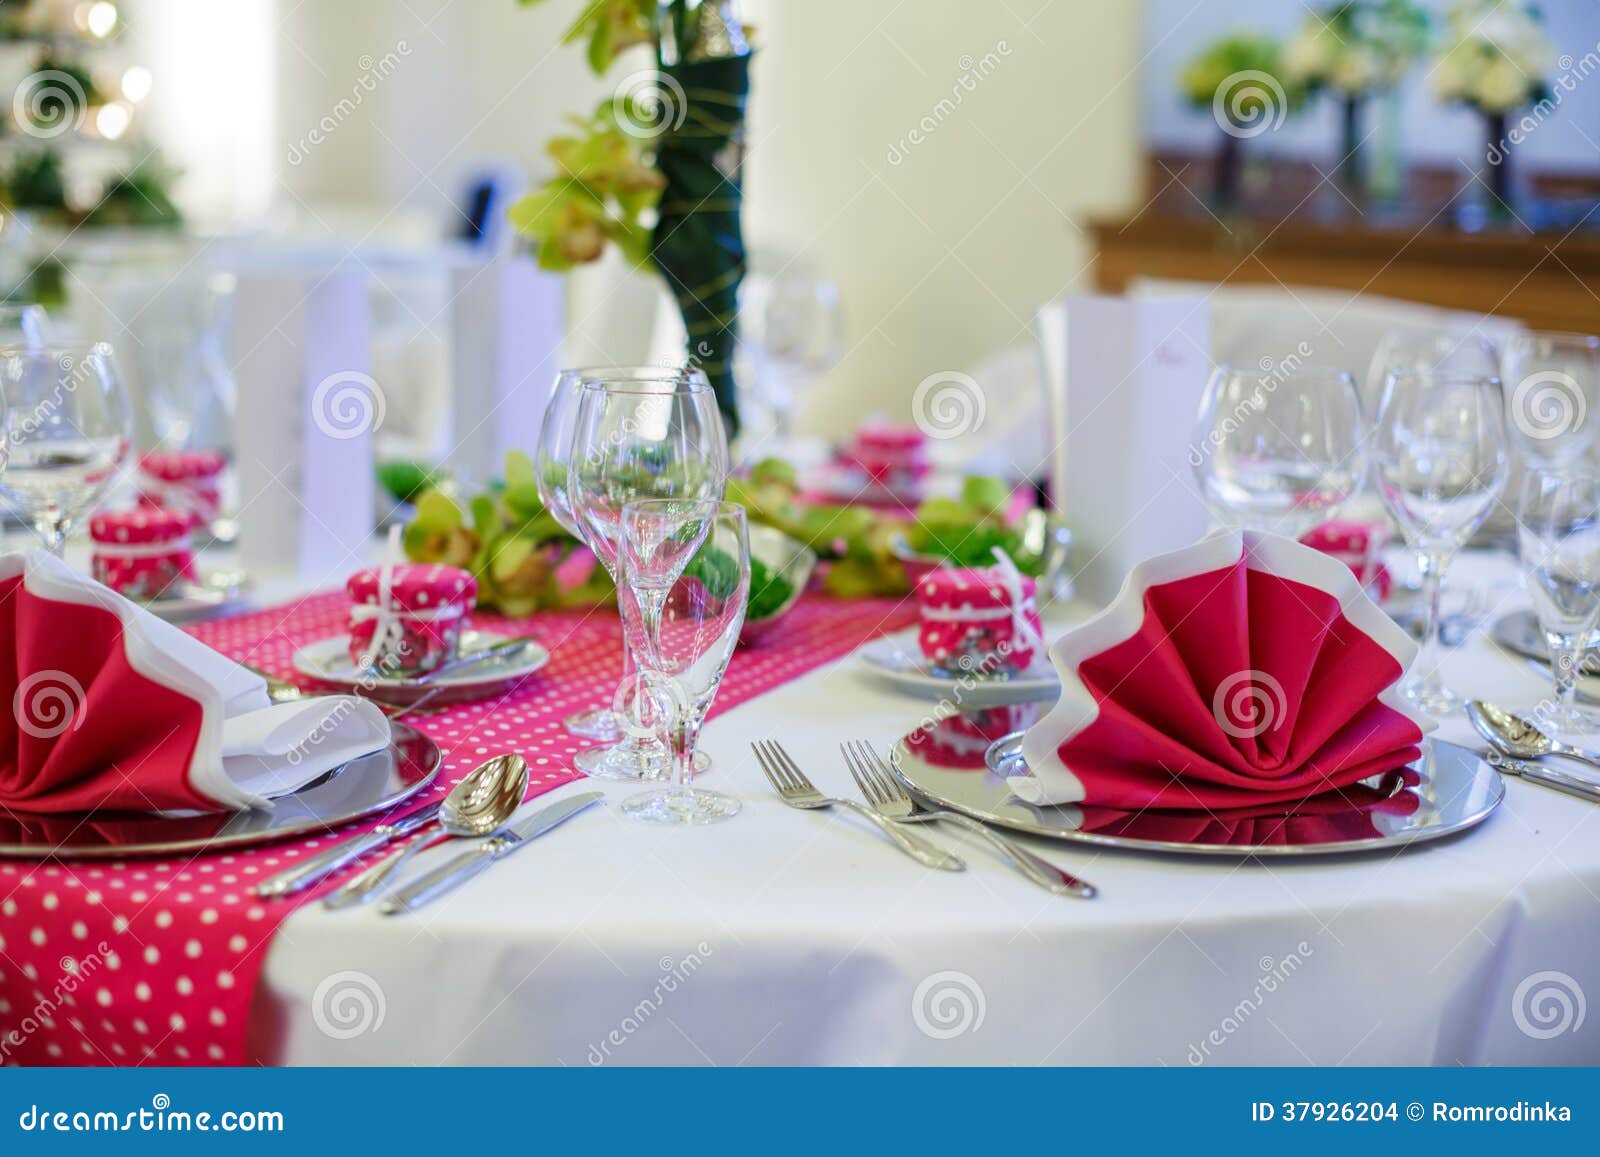 Elegant Table Set For Wedding Or Event Party Stock Photo Image Of